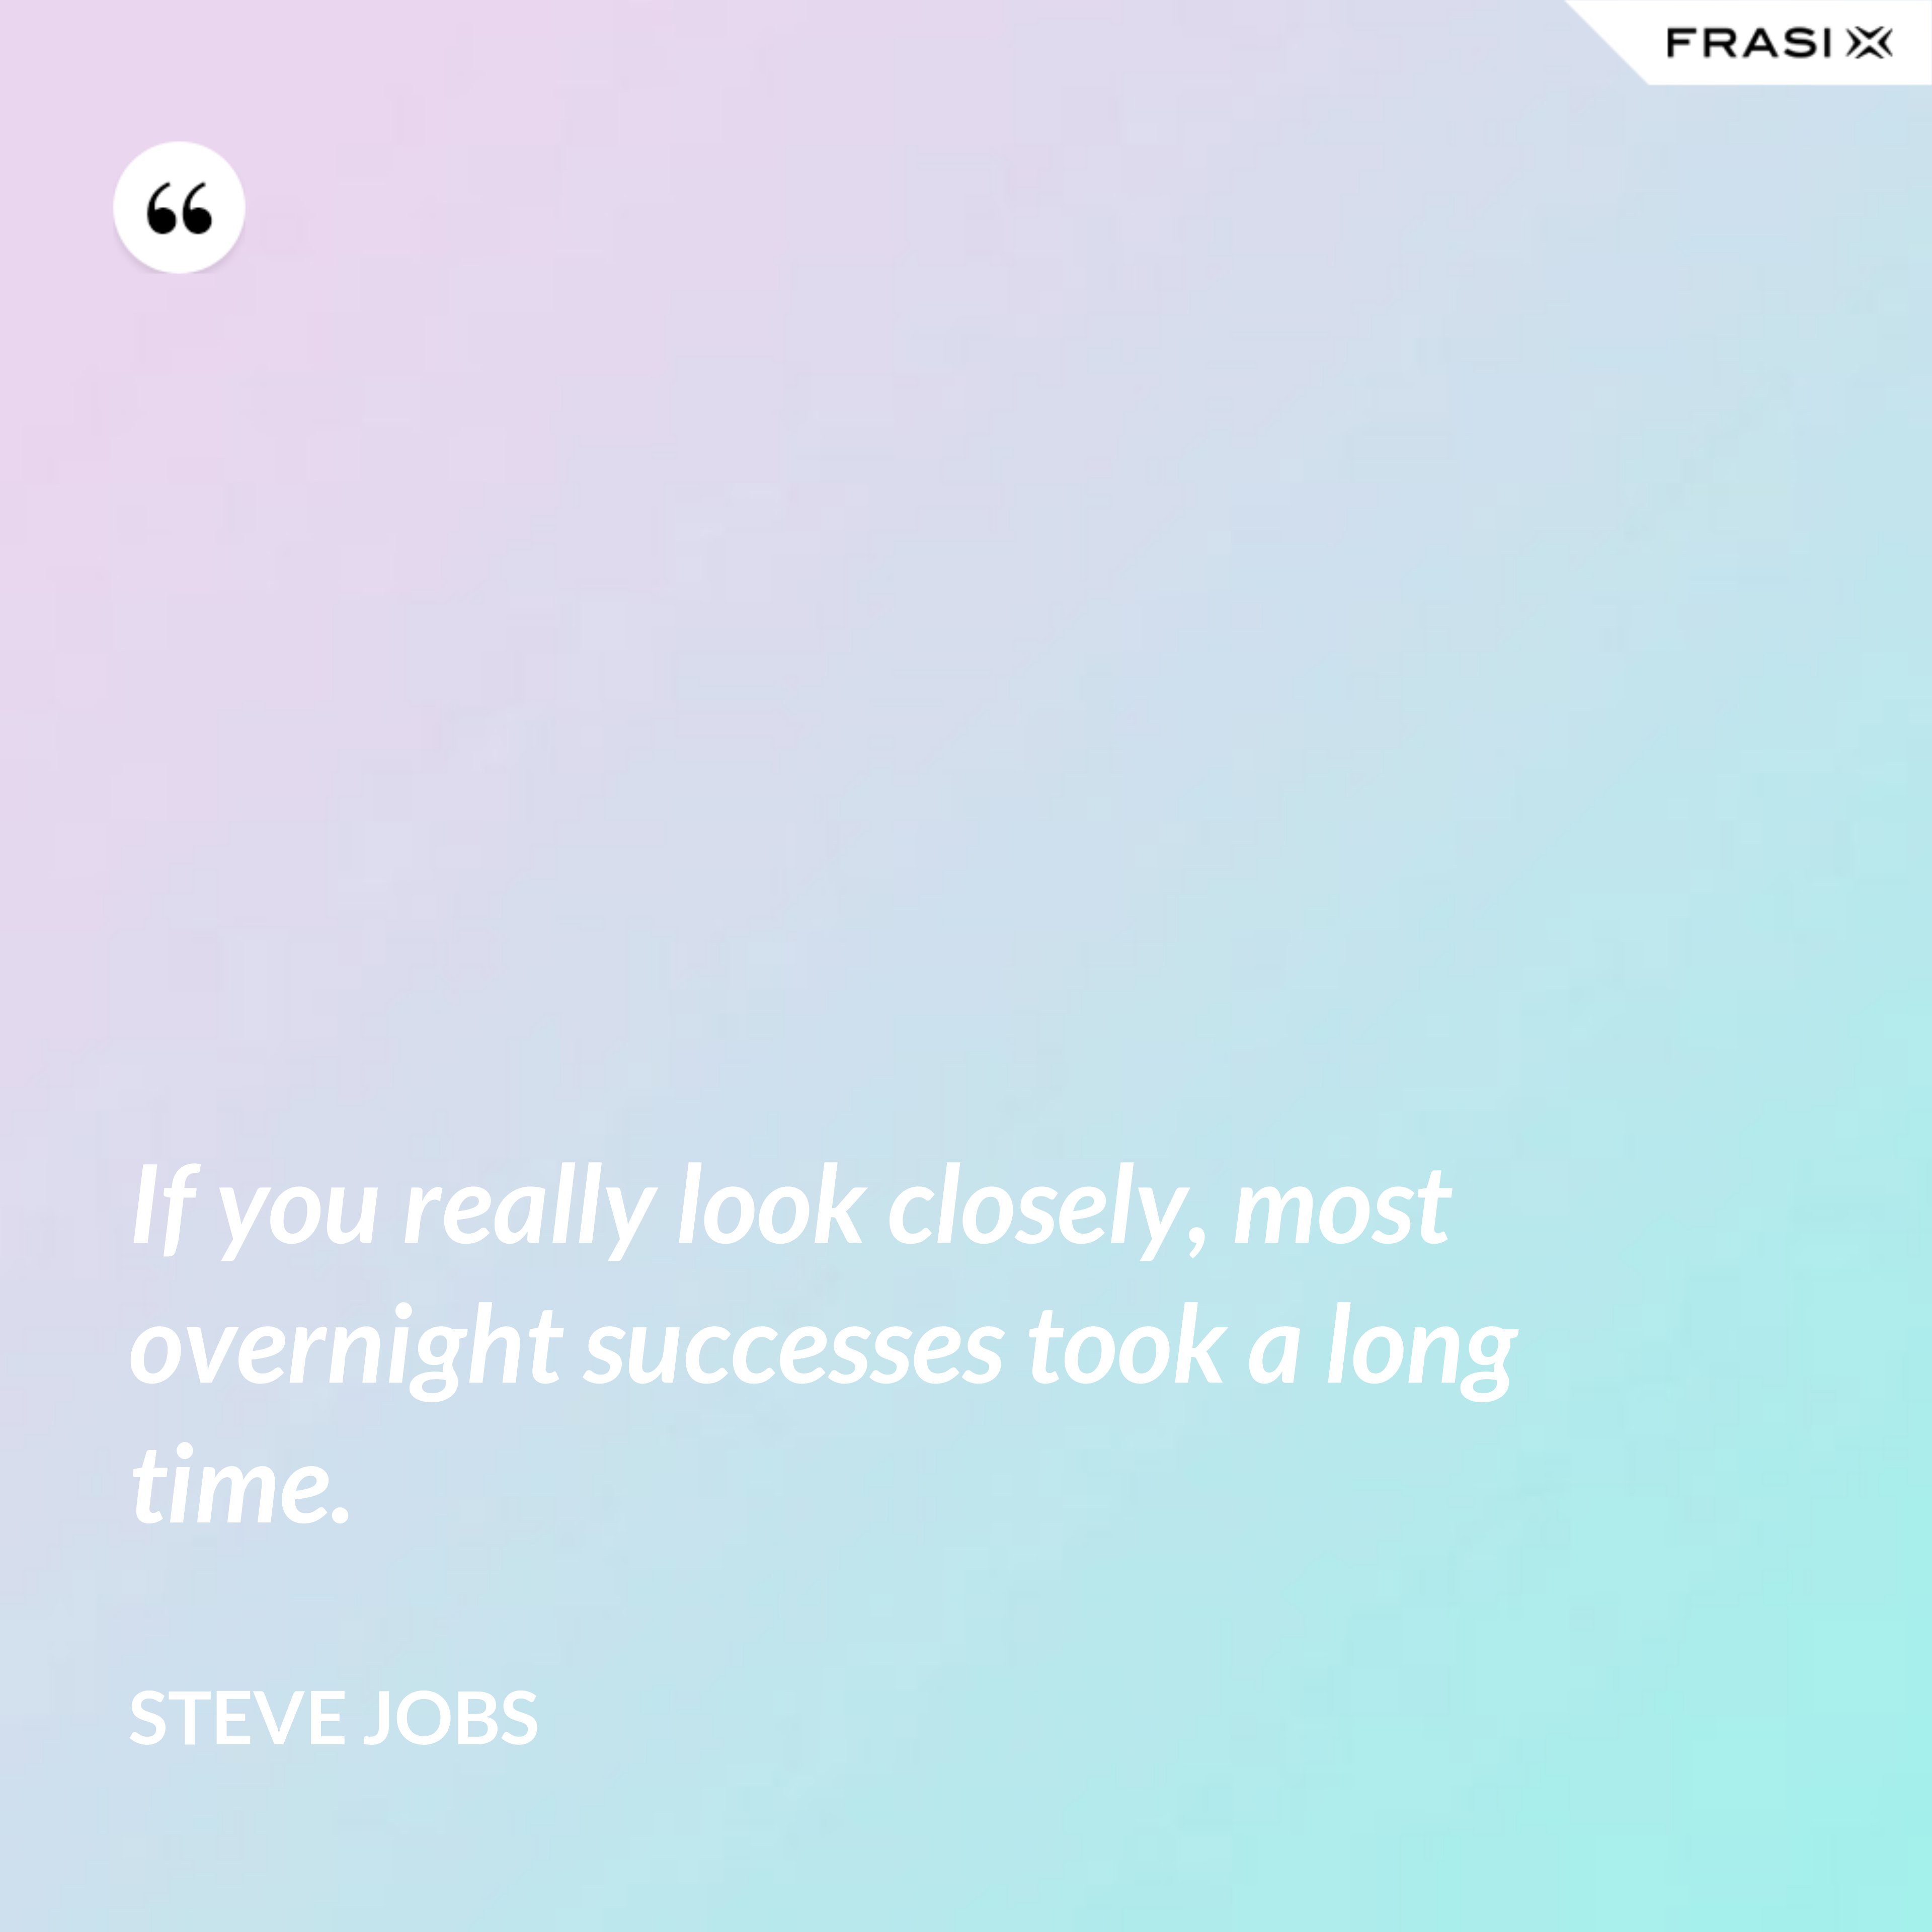 If you really look closely, most overnight successes took a long time. - Steve Jobs